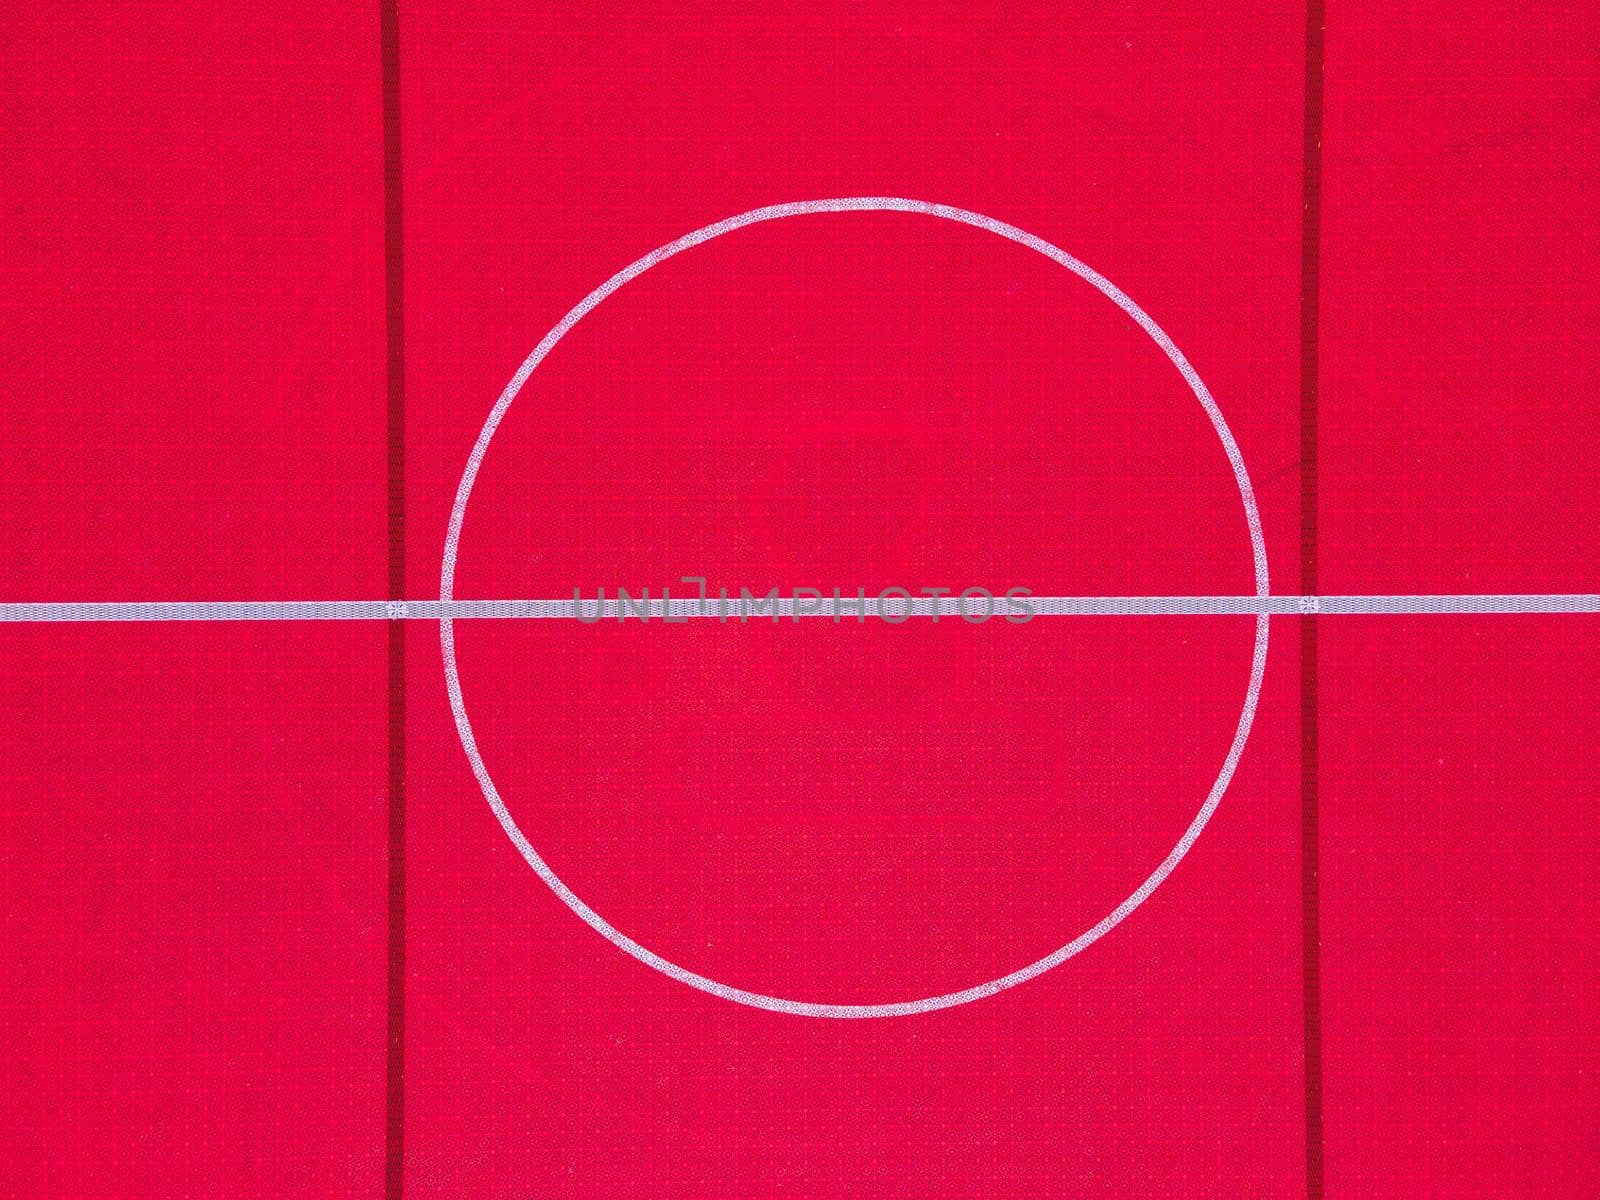 Plastic outdoor basketball court  floor, detail. Outdoor sport ground with red surface for playing basketball  in urban area, above. by Slast20